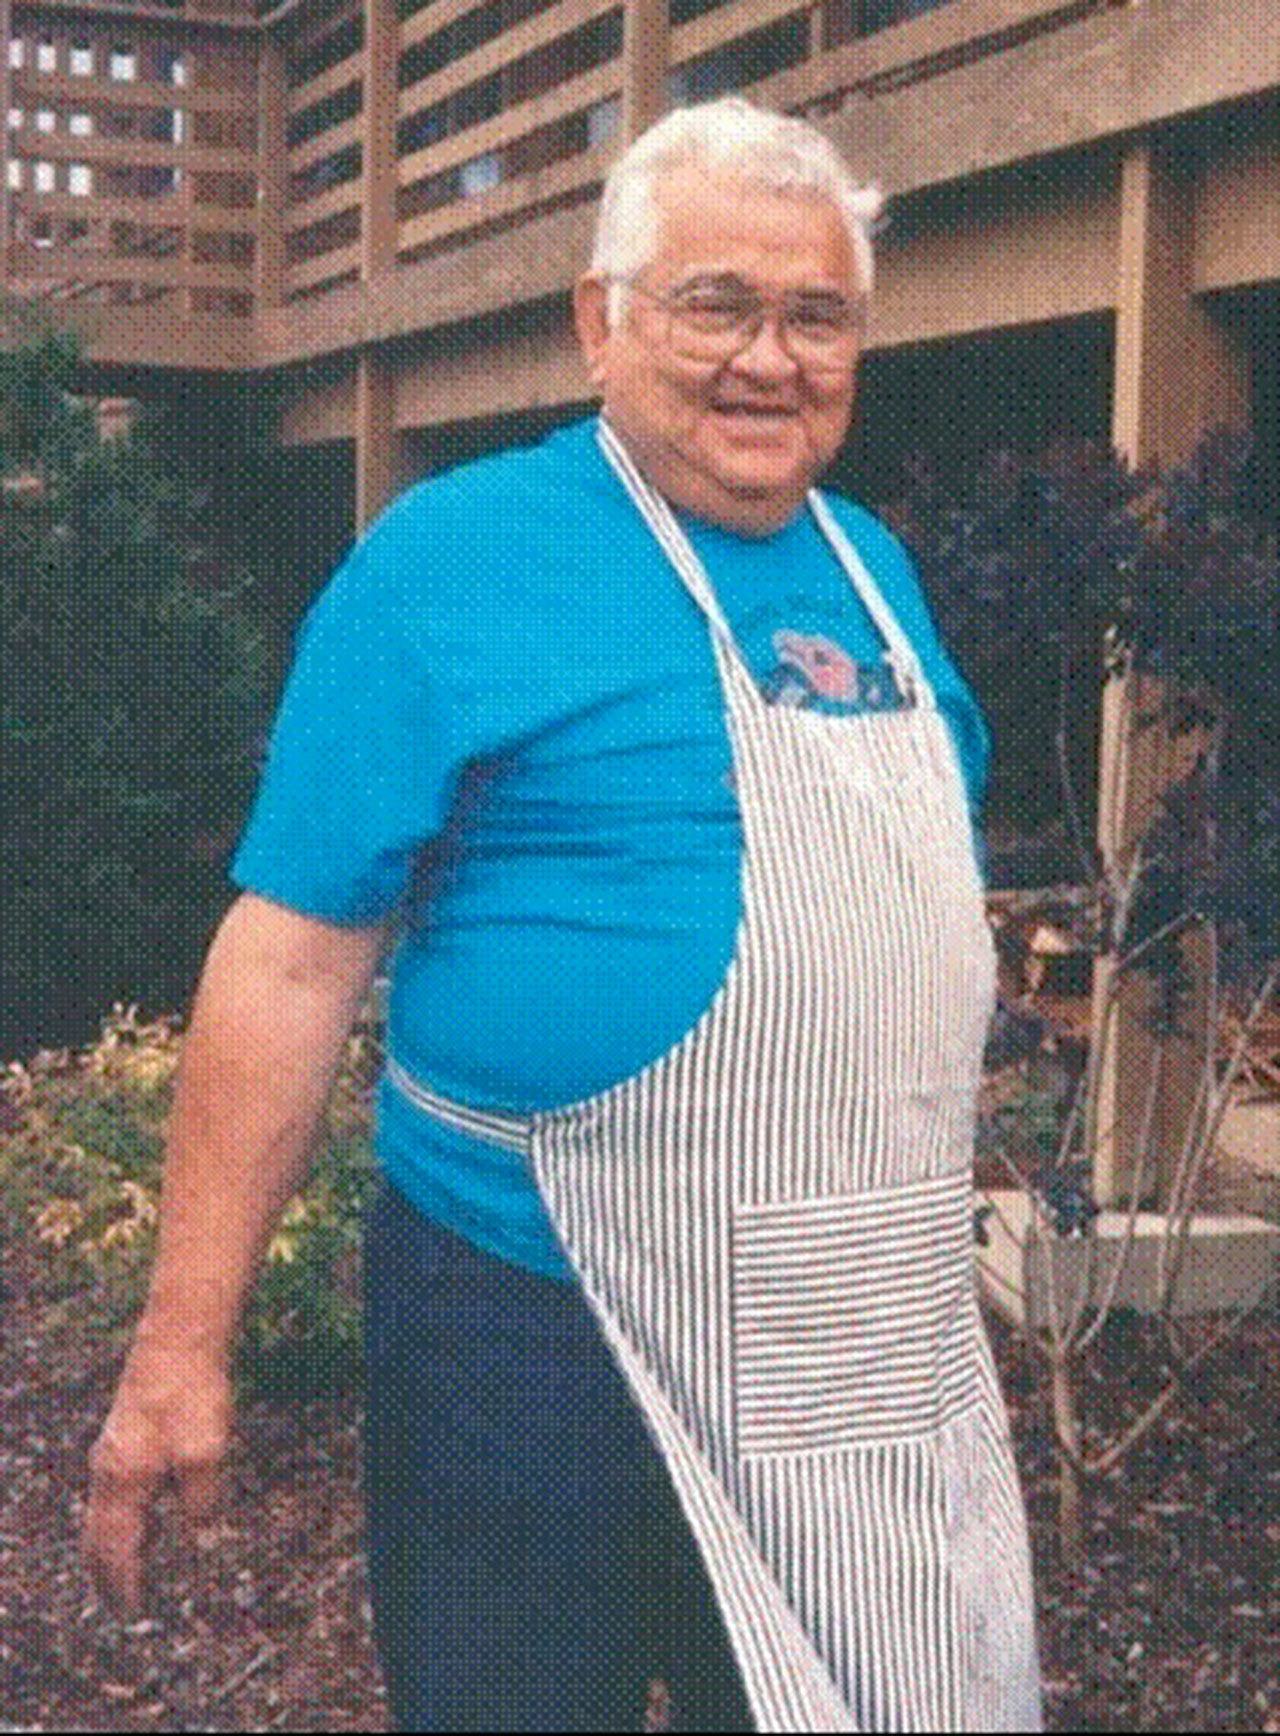 Lyle Prince, the last full-blooded Jamestown S’Klallam tribal member, died Jan. 15 at the age of 89. A memorial service will be held for him this Saturday in Blyn.